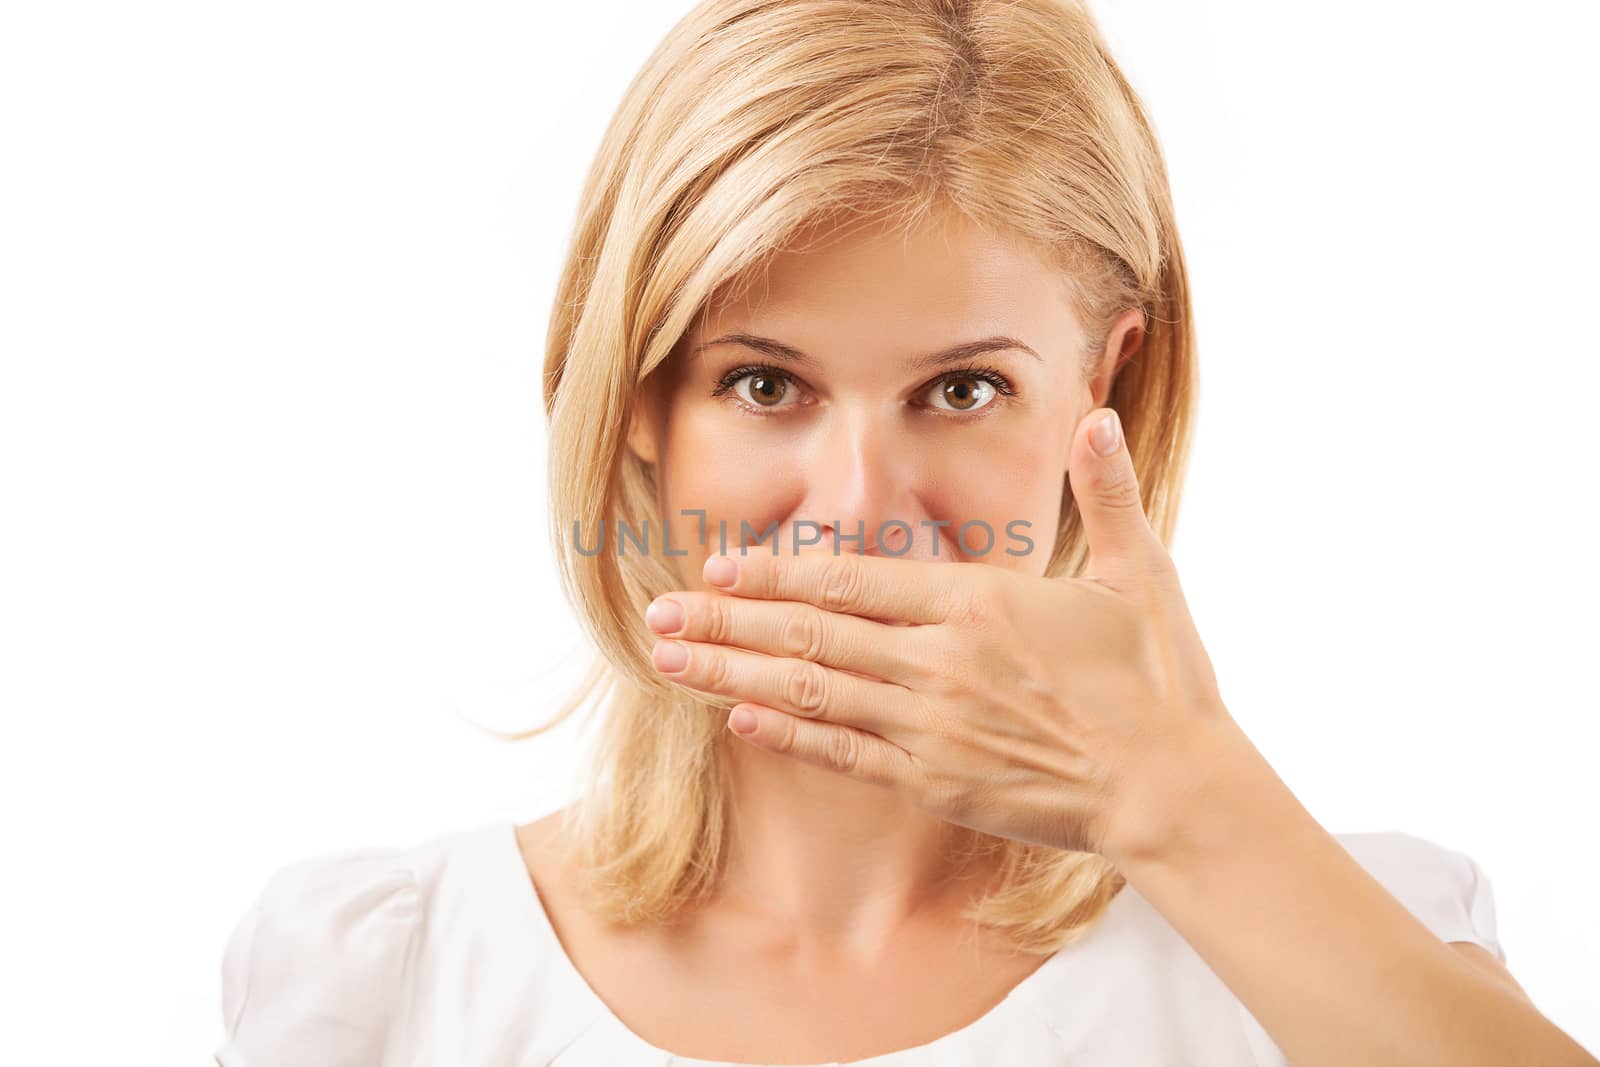 Smiling young woman covering mouth over white background